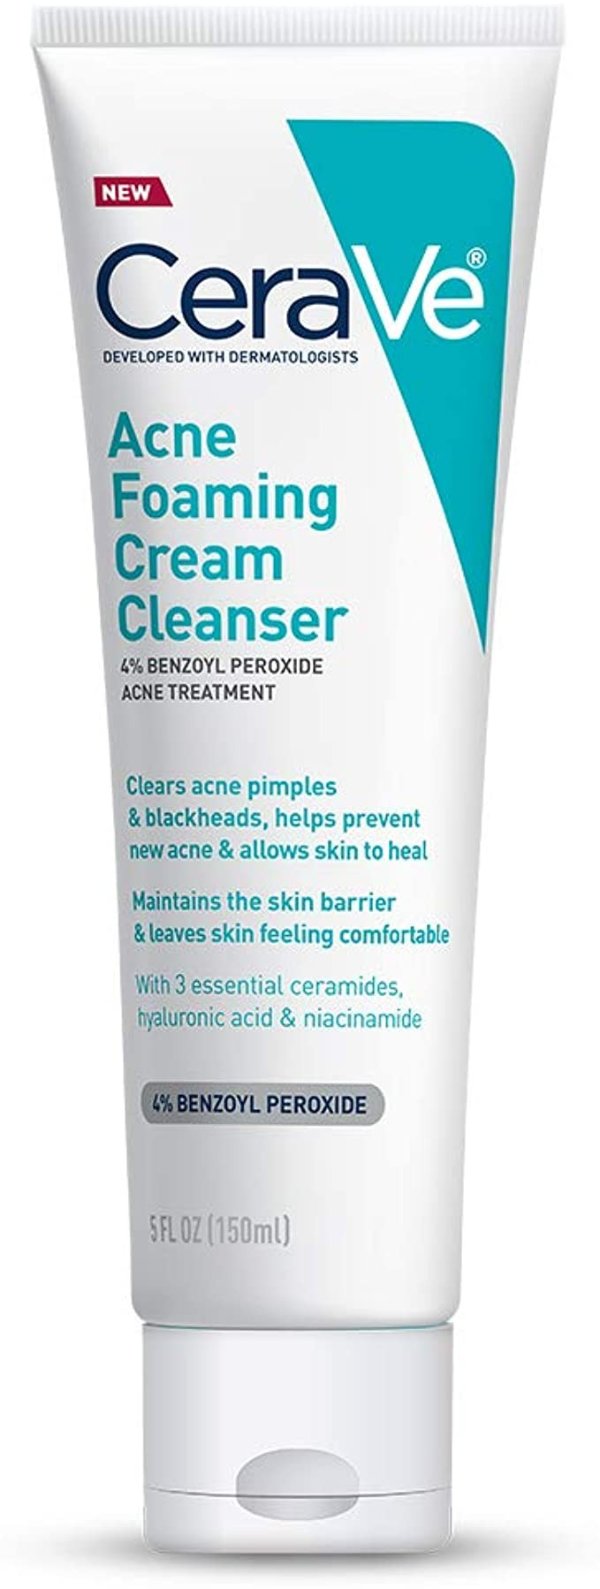 Acne Foaming Cream Cleanser | Acne Treatment Face Wash with 4% Benzoyl Peroxide, Hyaluronic Acid, and Niacinamide | Cream to Foam Formula | 5 Oz